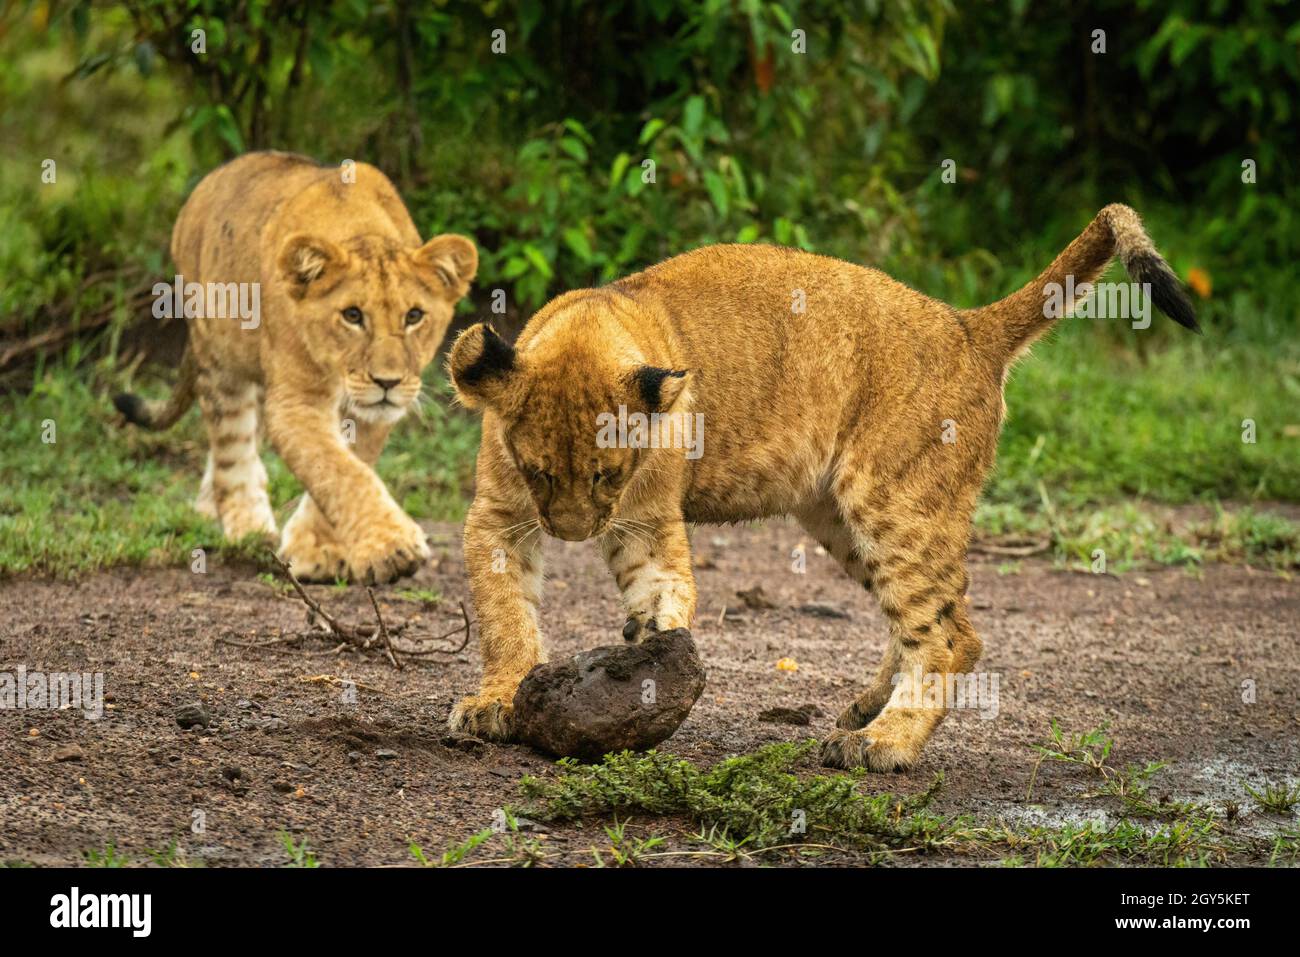 Lion cub stalks another playing with rock Stock Photo